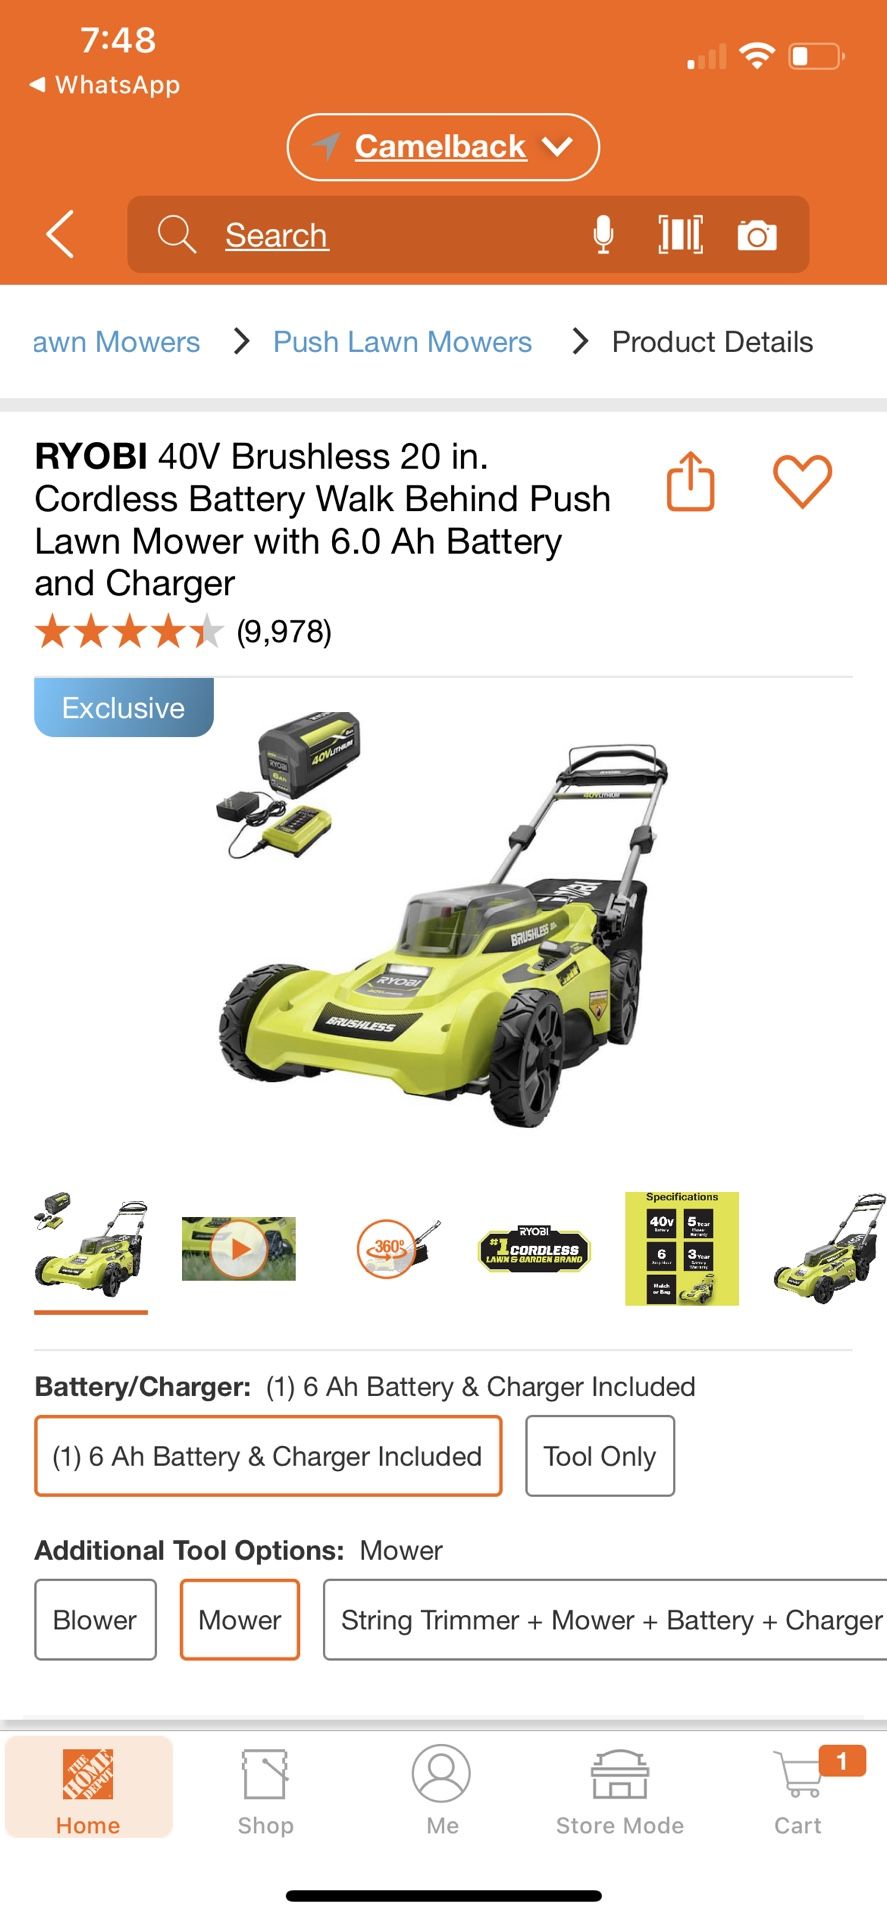 RYOBI 40V Brushless 20 in. Cordless Battery Walk Behind Push Lawn Mower with 6.0 Ah Battery and Charger